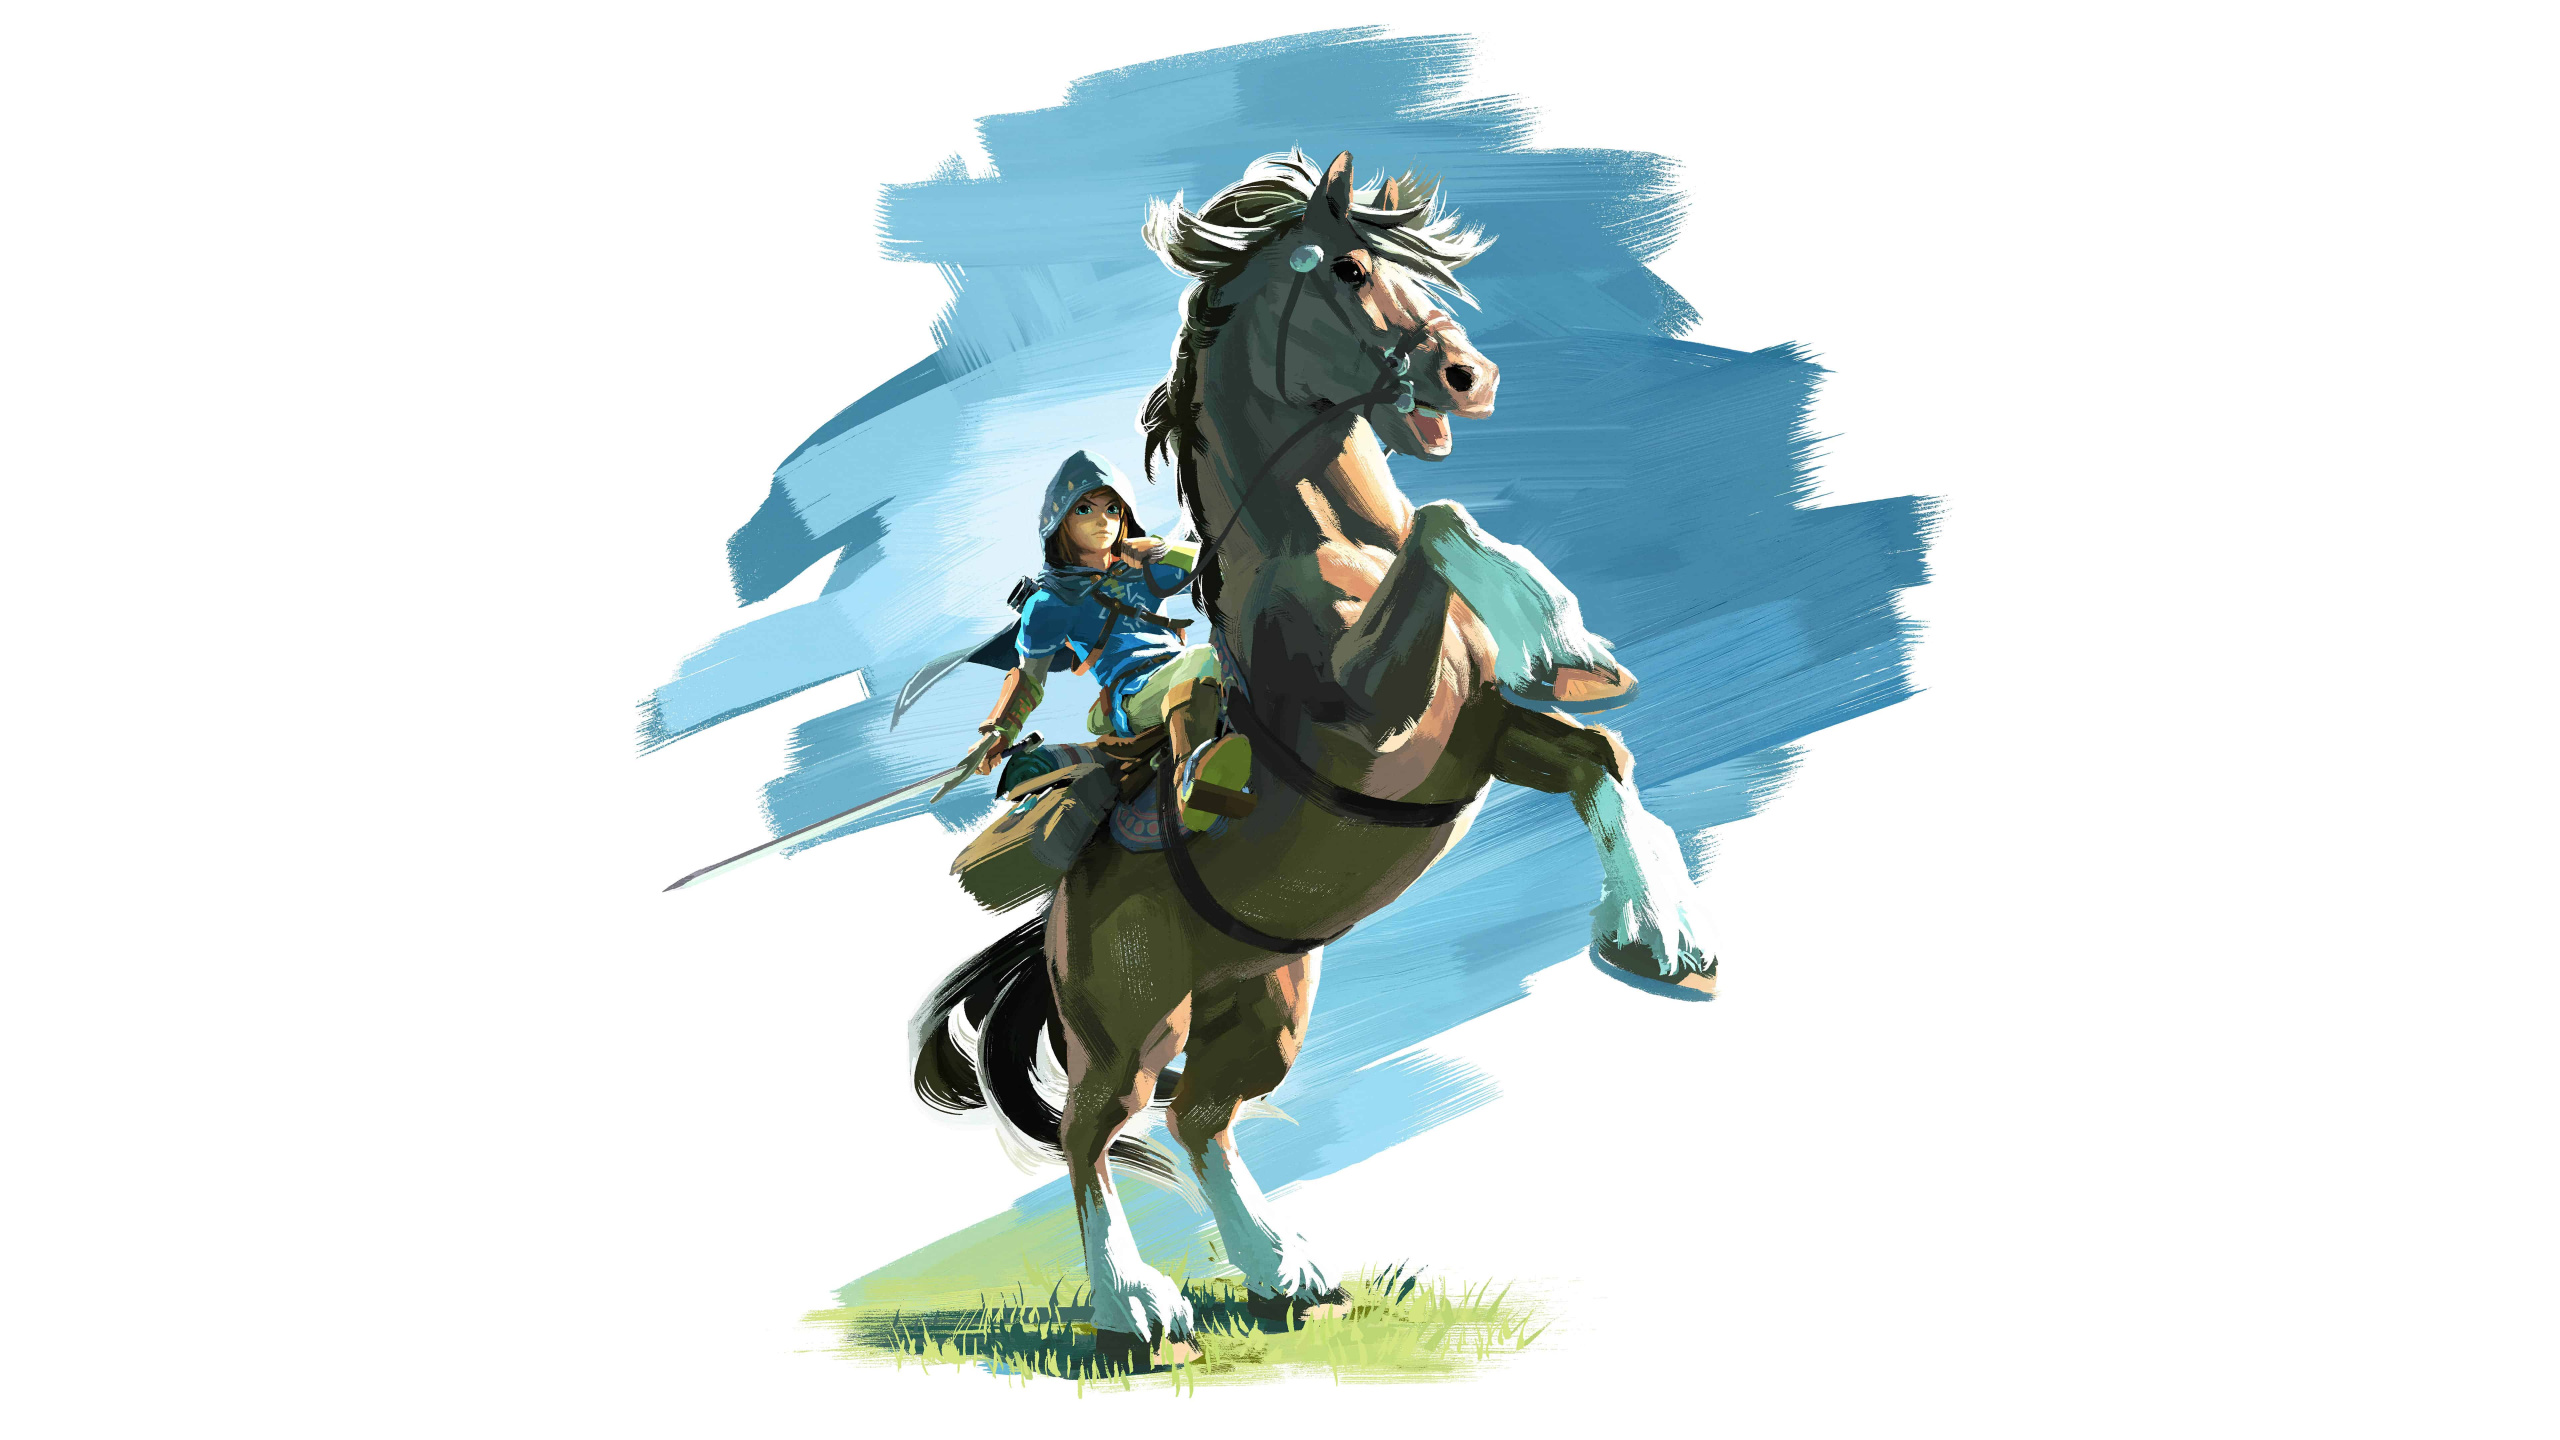 Woman in Blue Dress Riding White Horse Illustration. Wallpaper in 2560x1440 Resolution